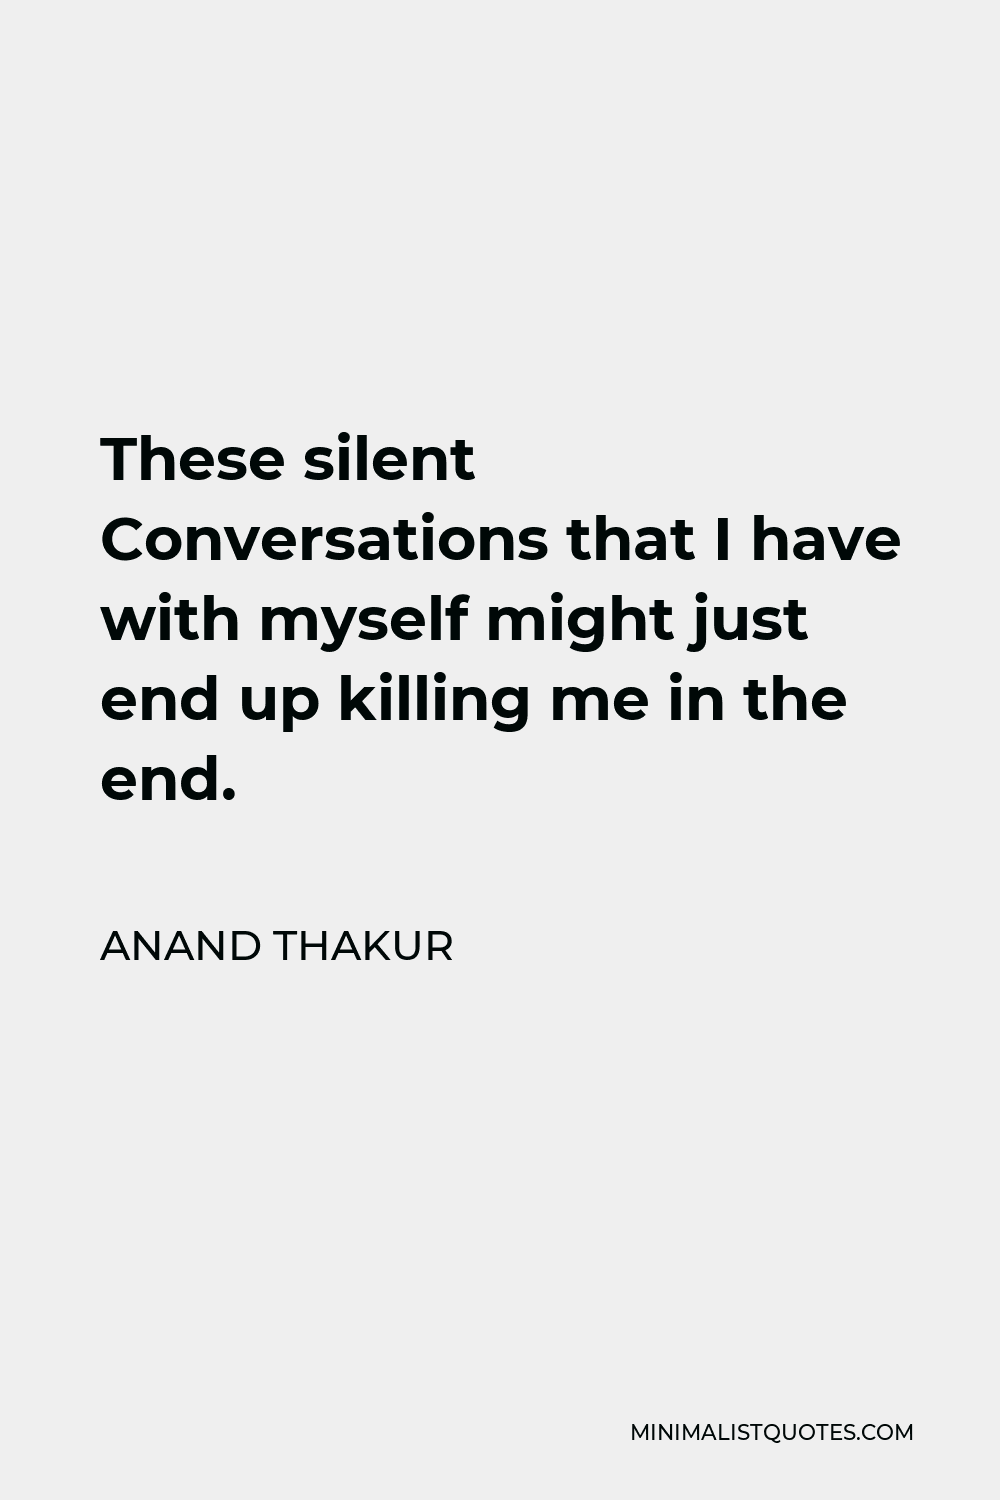 Anand Thakur Quote - These silent Conversations that I have with myself might just end up killing me in the end.